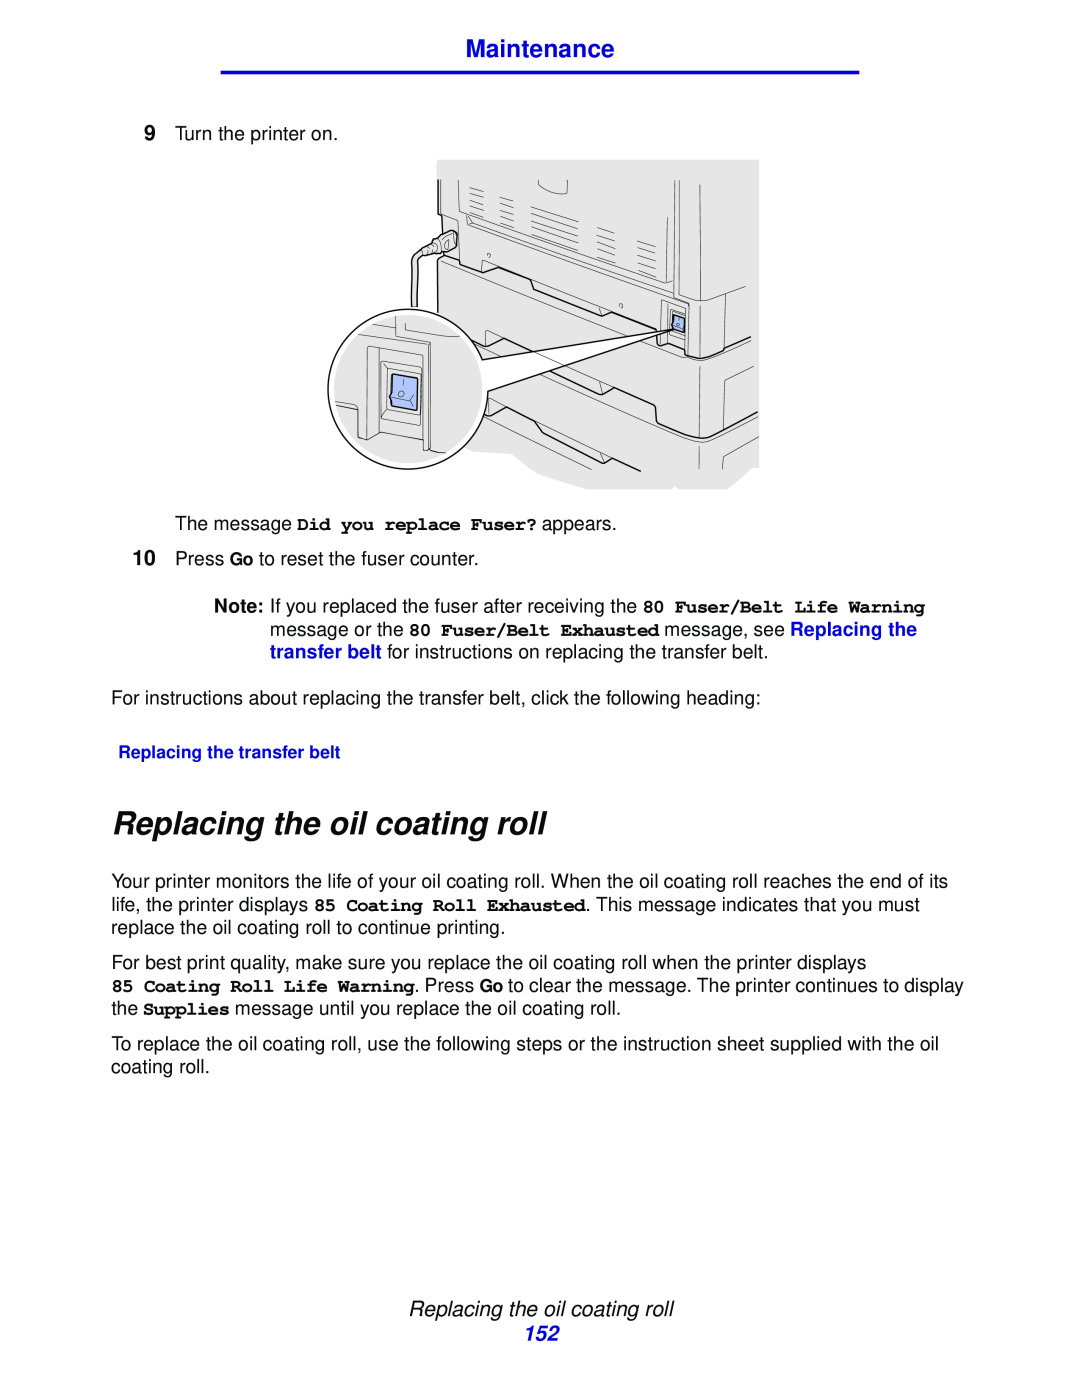 Lexmark 912 manual Replacing the oil coating roll, Maintenance 